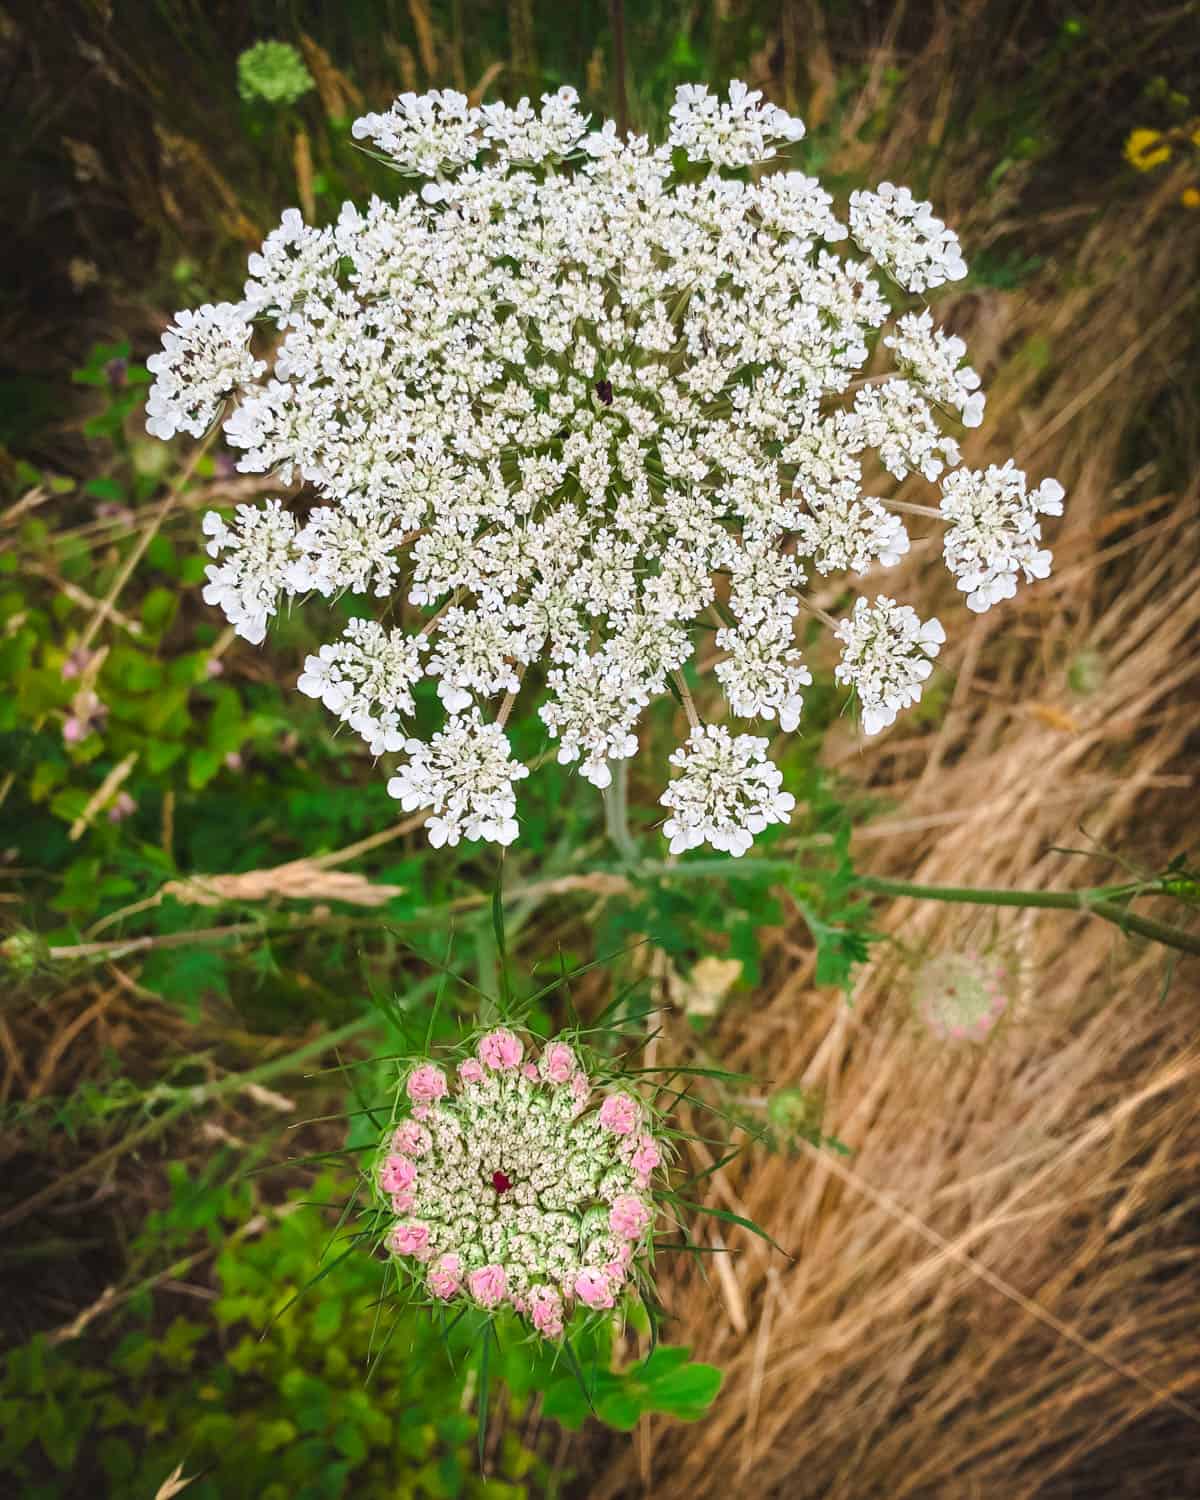 2 Queen Anne's lace flowers, one small with a pink tinge, and the other fully bloomed and white.